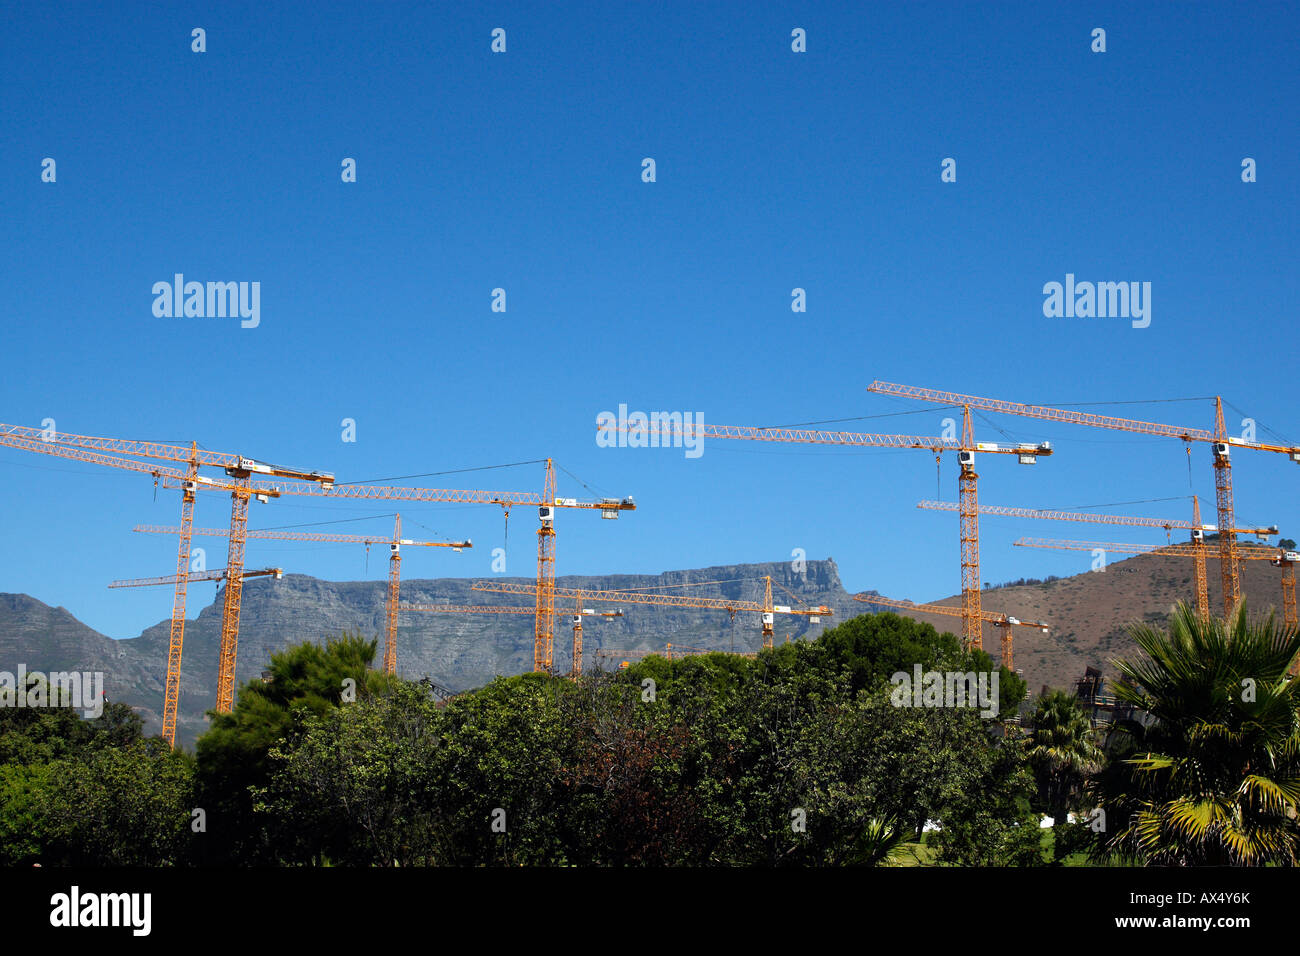 construction cranes building the new stadium granger bay boulevard cape town western cape province south africa Stock Photo